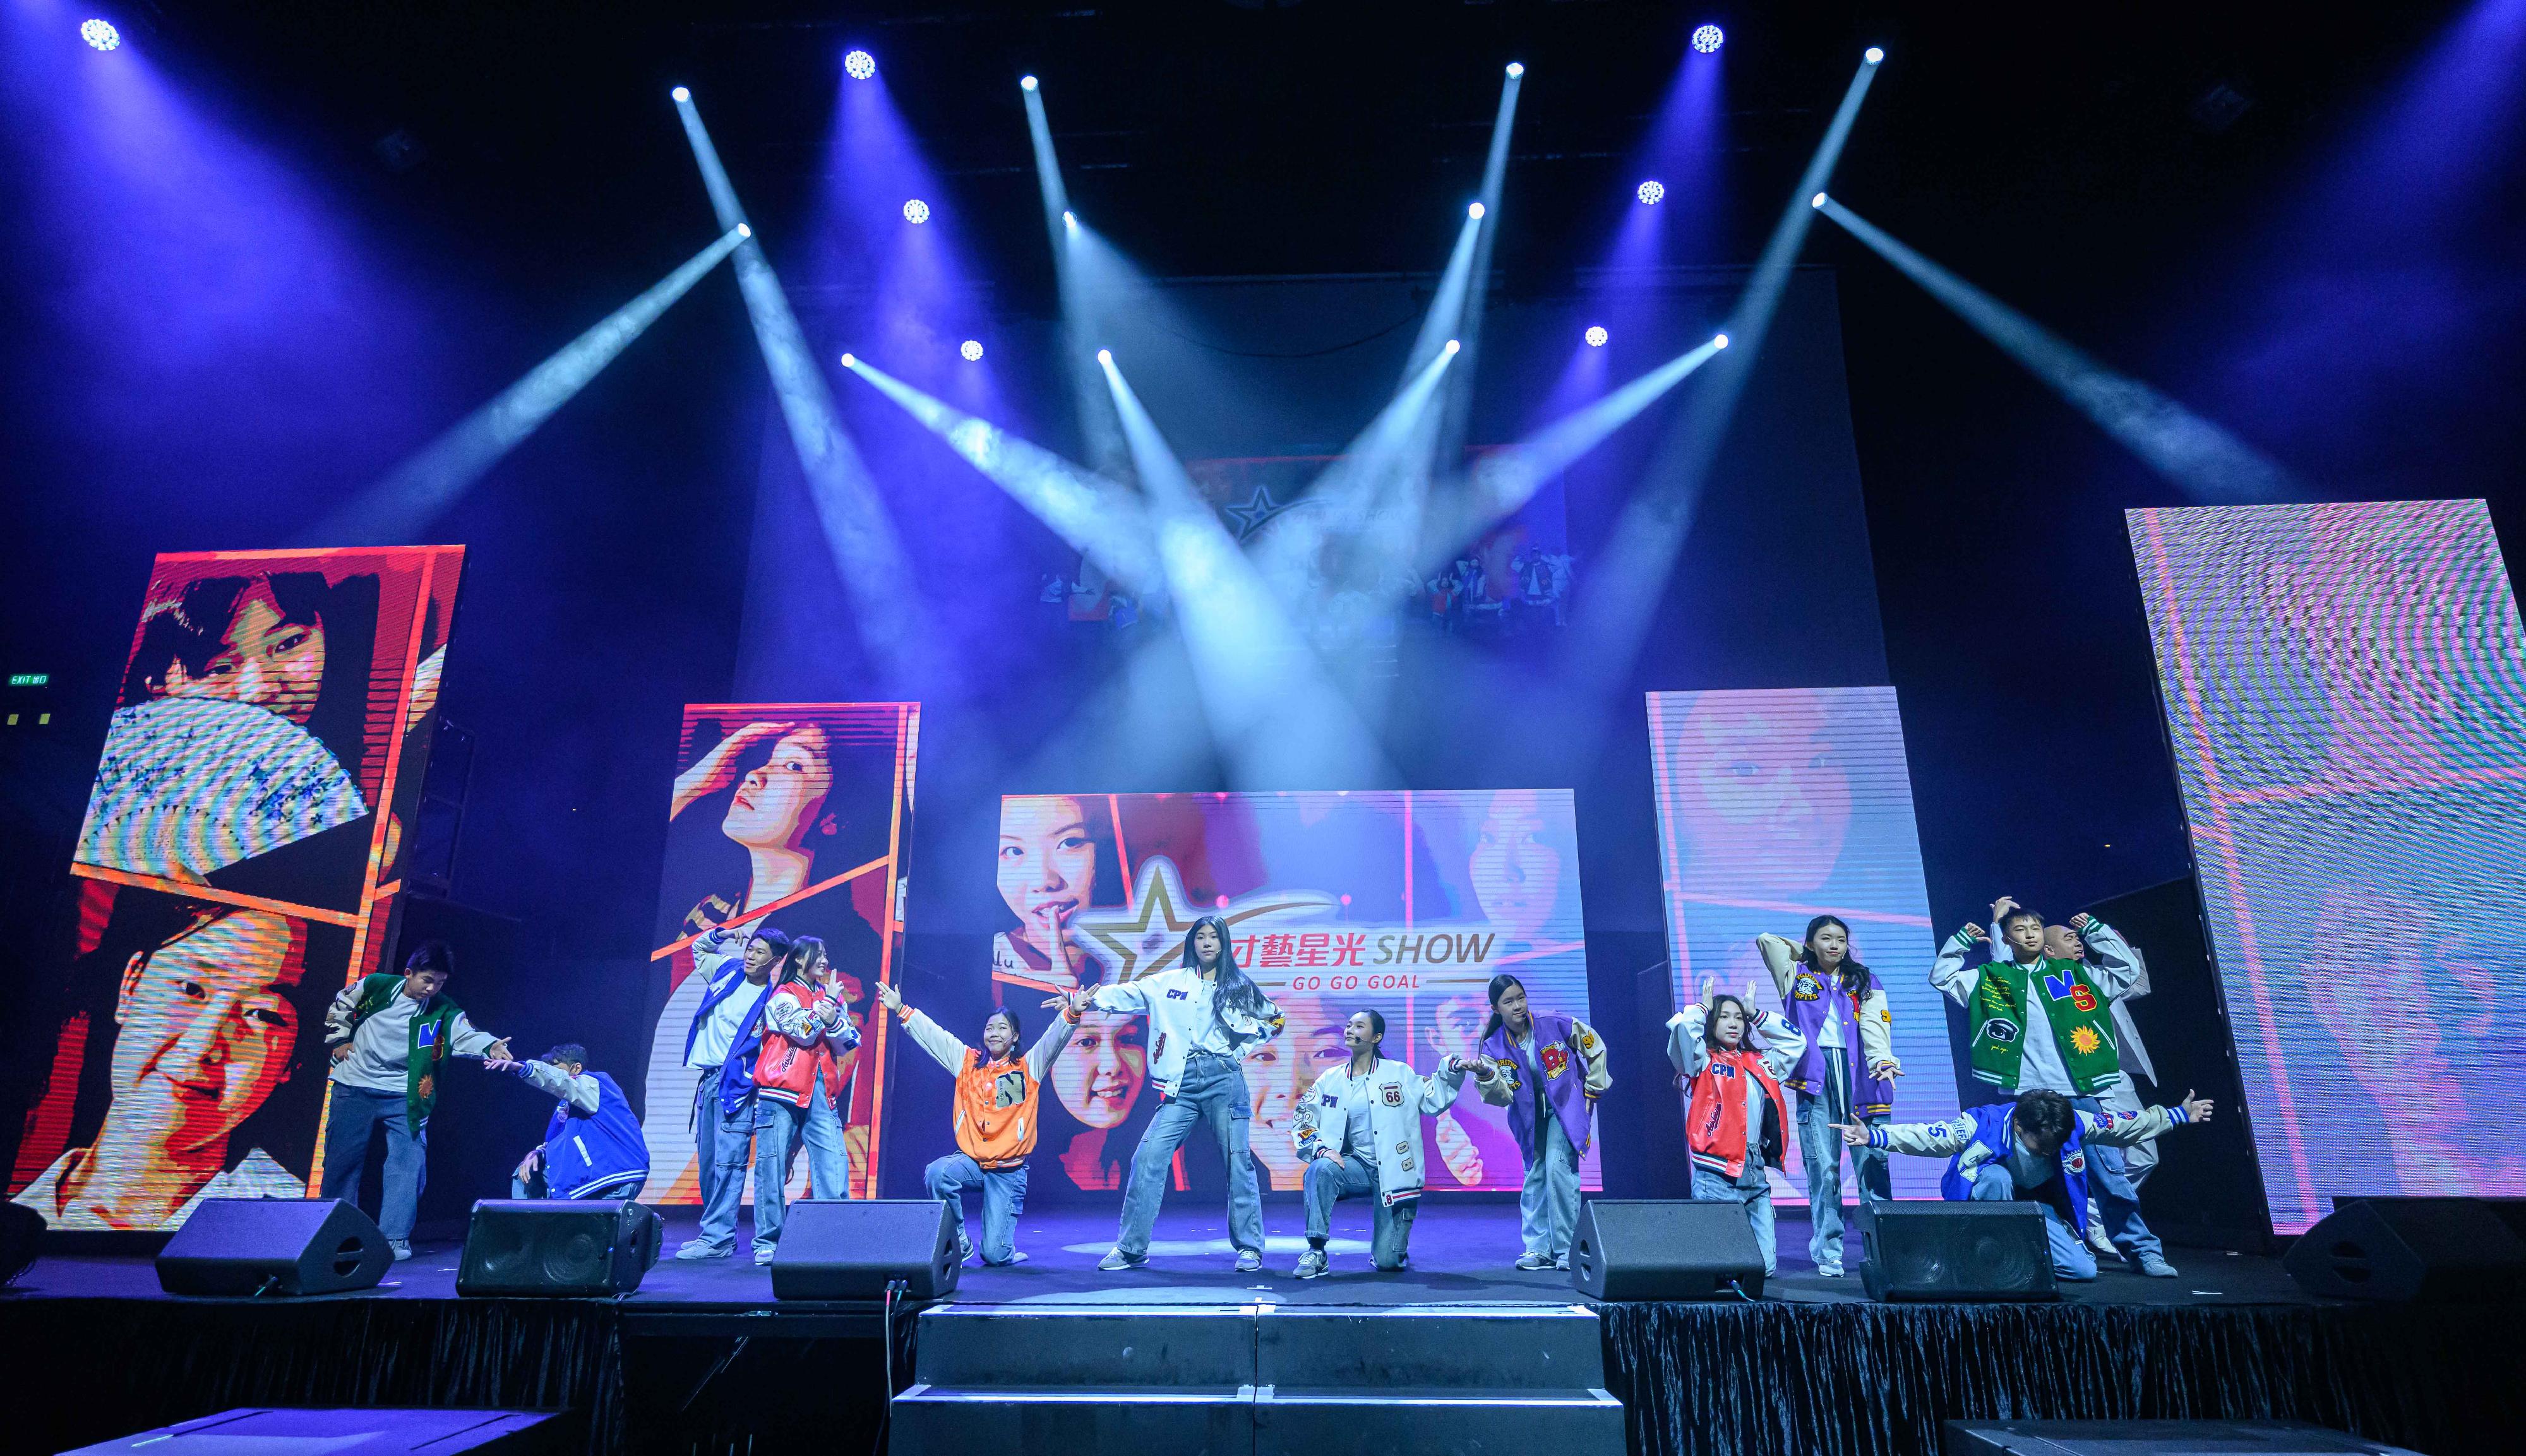 The Correctional Services Department and the Chinese Manufacturers' Association of Hong Kong jointly organised a youth musical drama, “Life Revitalisation Go Go Goal!”, at Queen Elizabeth Stadium today (January 26) to promote law-abiding and rehabilitation messages. Photo shows the spectacular performances in the musical drama.